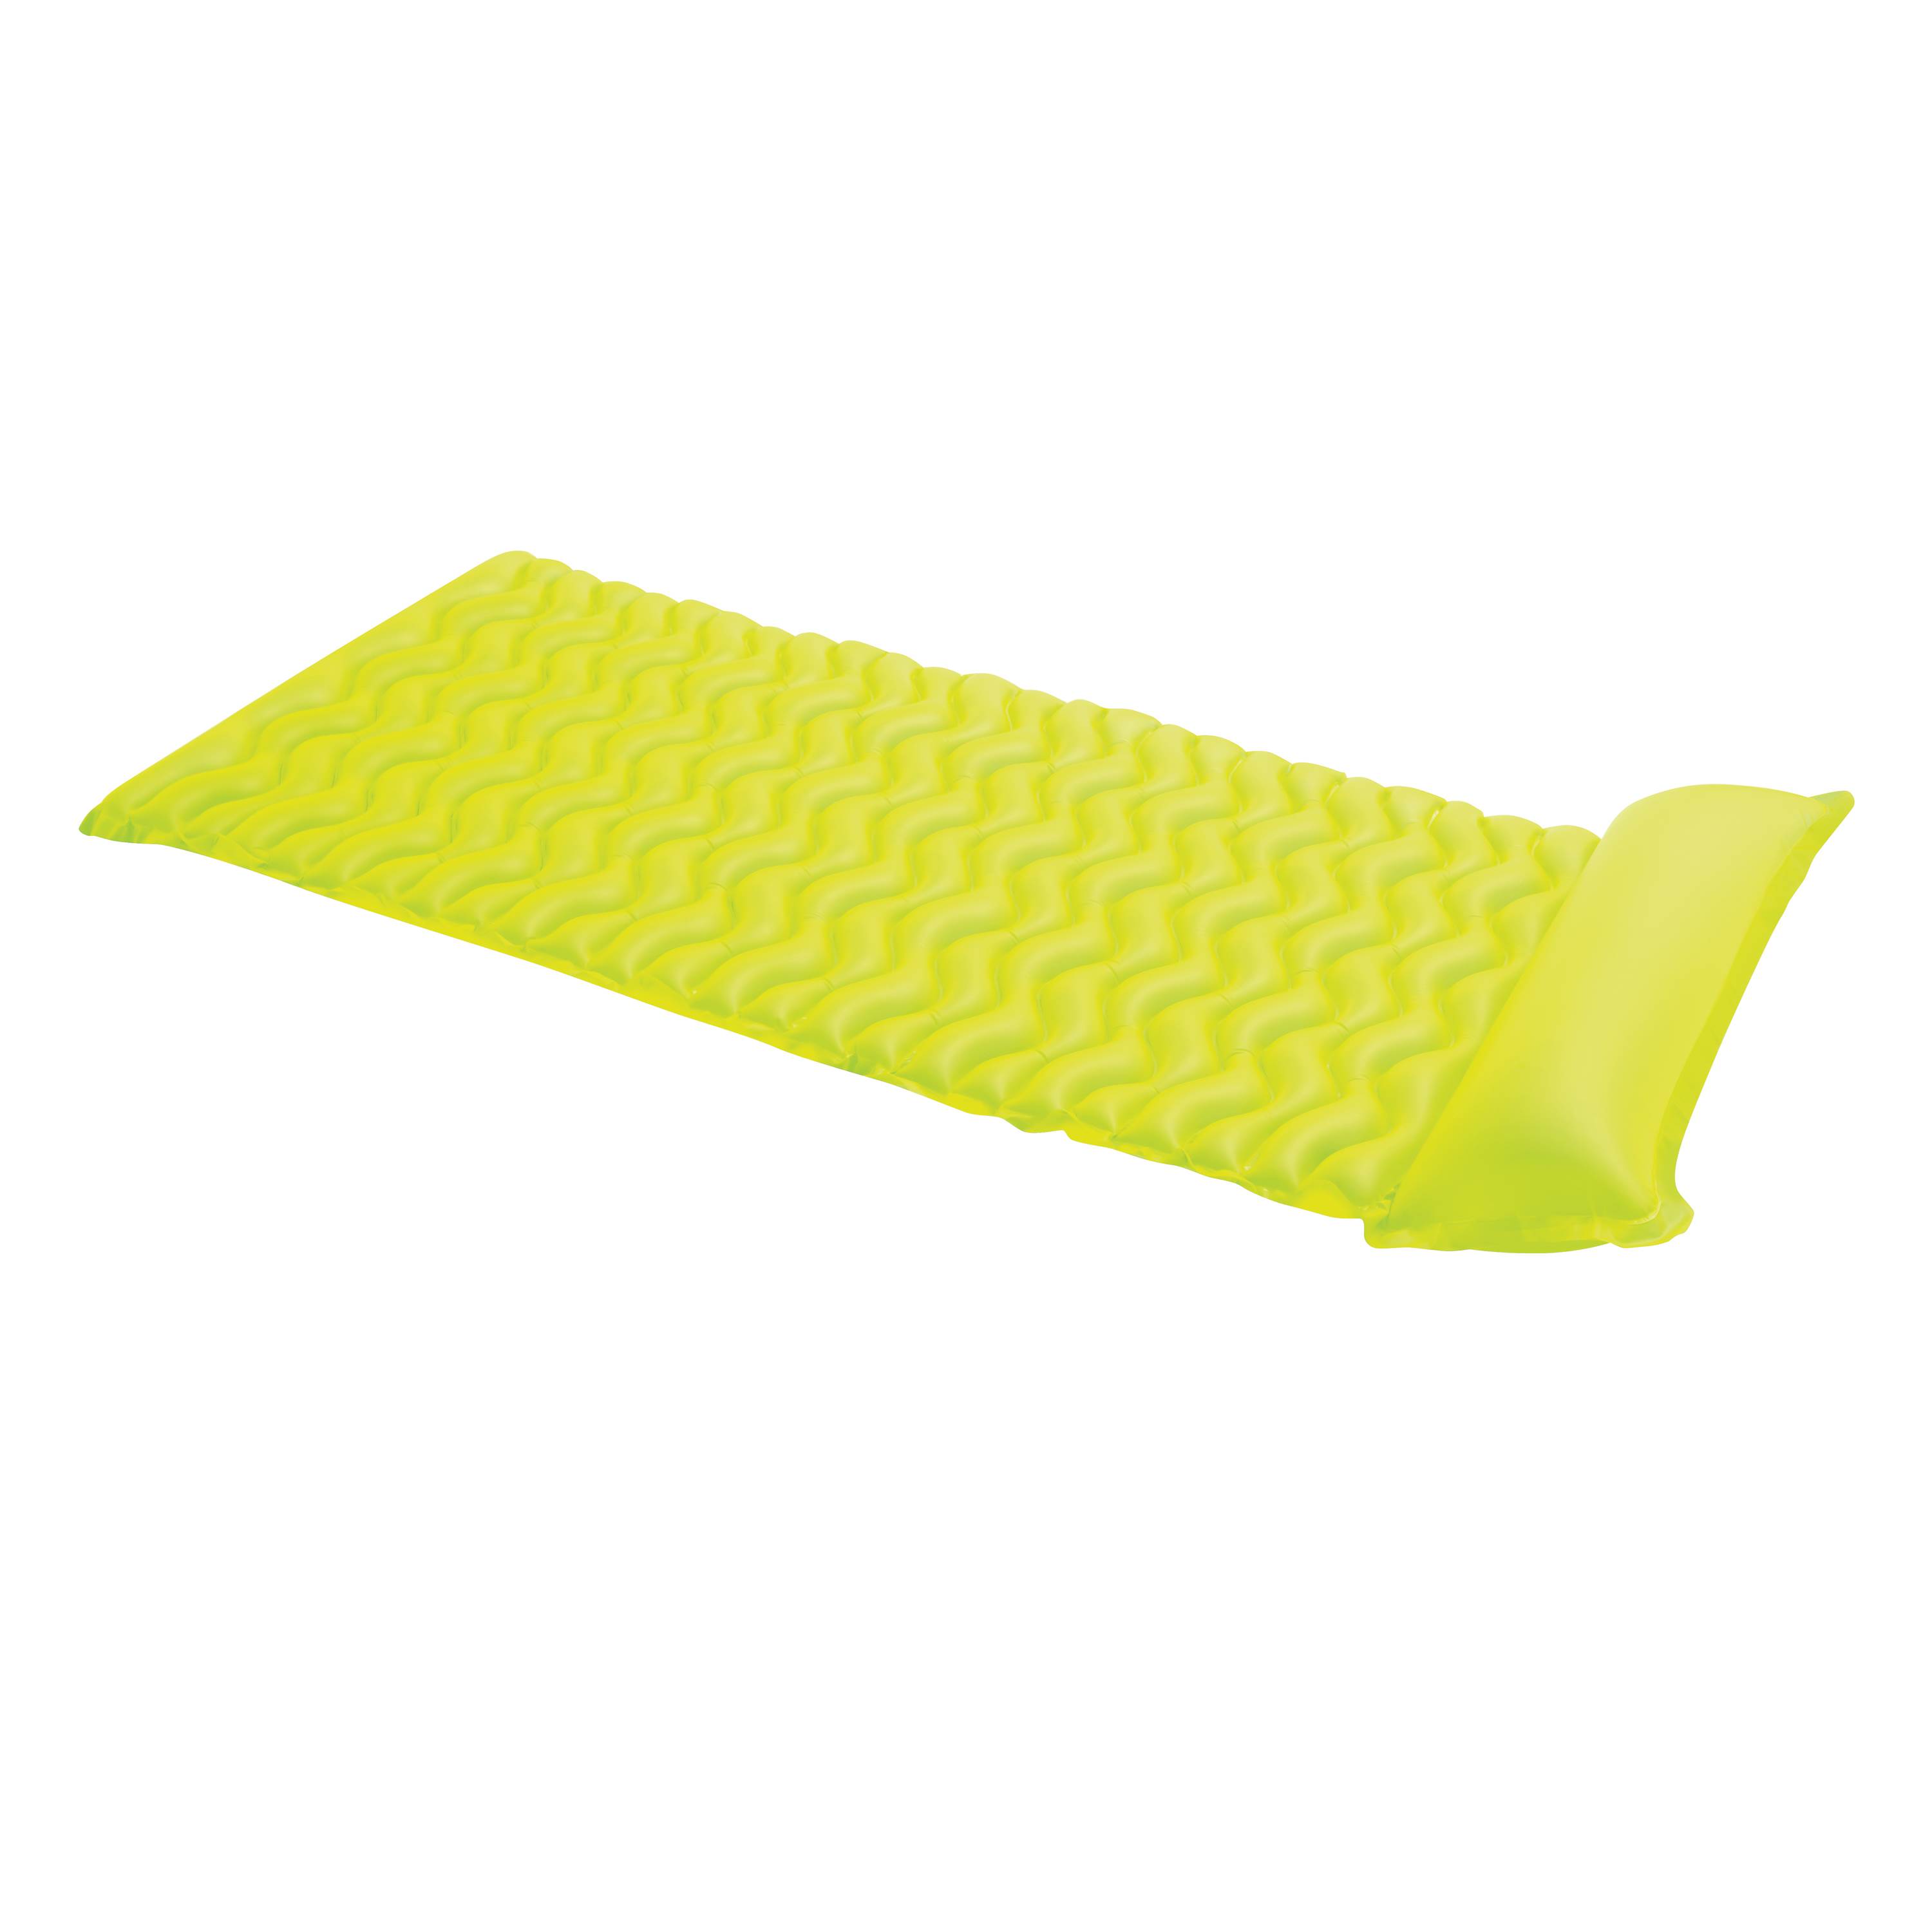 Intex Tote 'N Float Wave Mat Pool Lounger with Headrest - 1 Piece - image 3 of 6